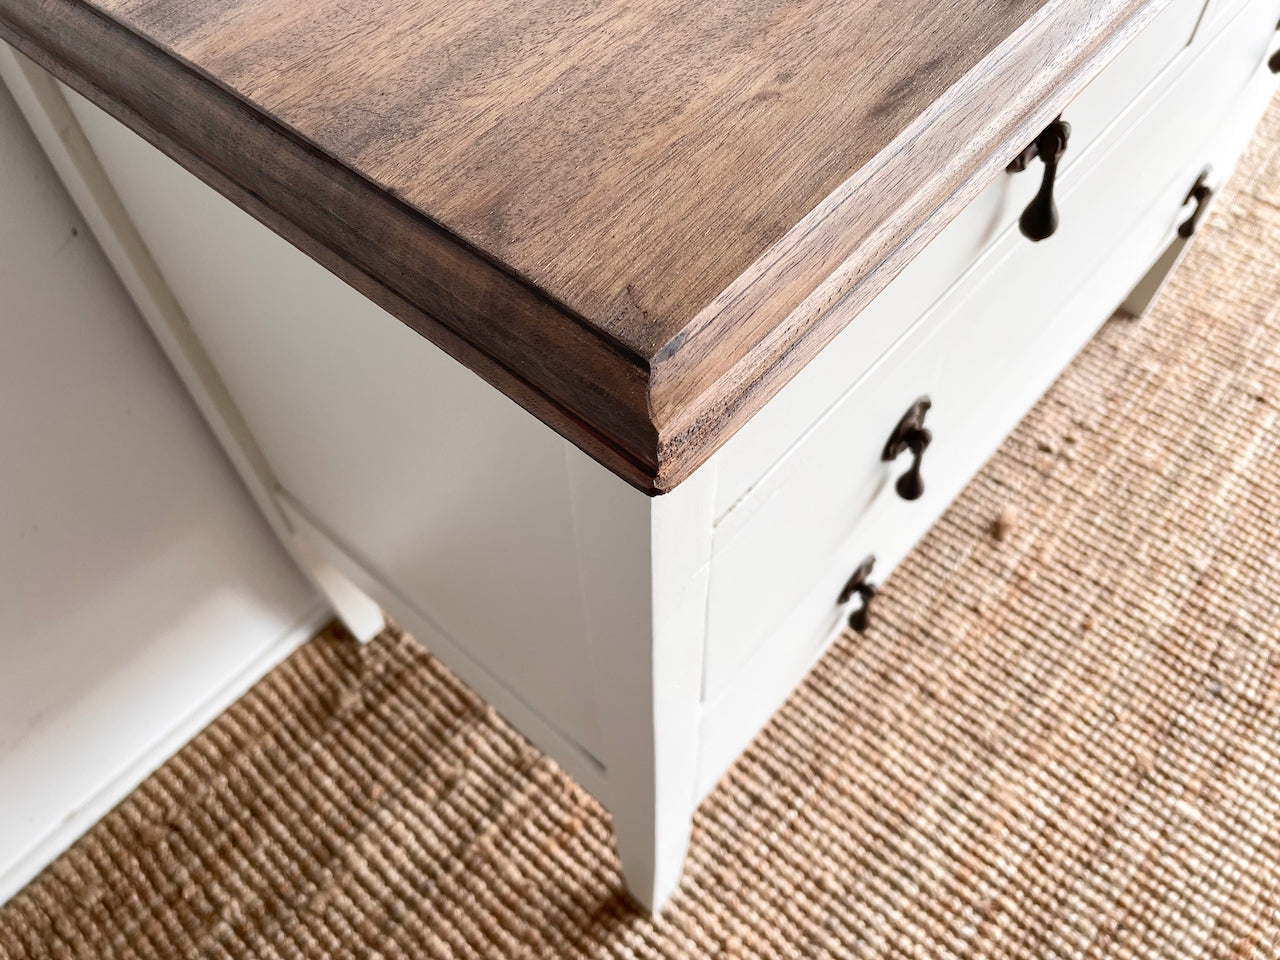 Farmhouse Style Bedroom Drawers